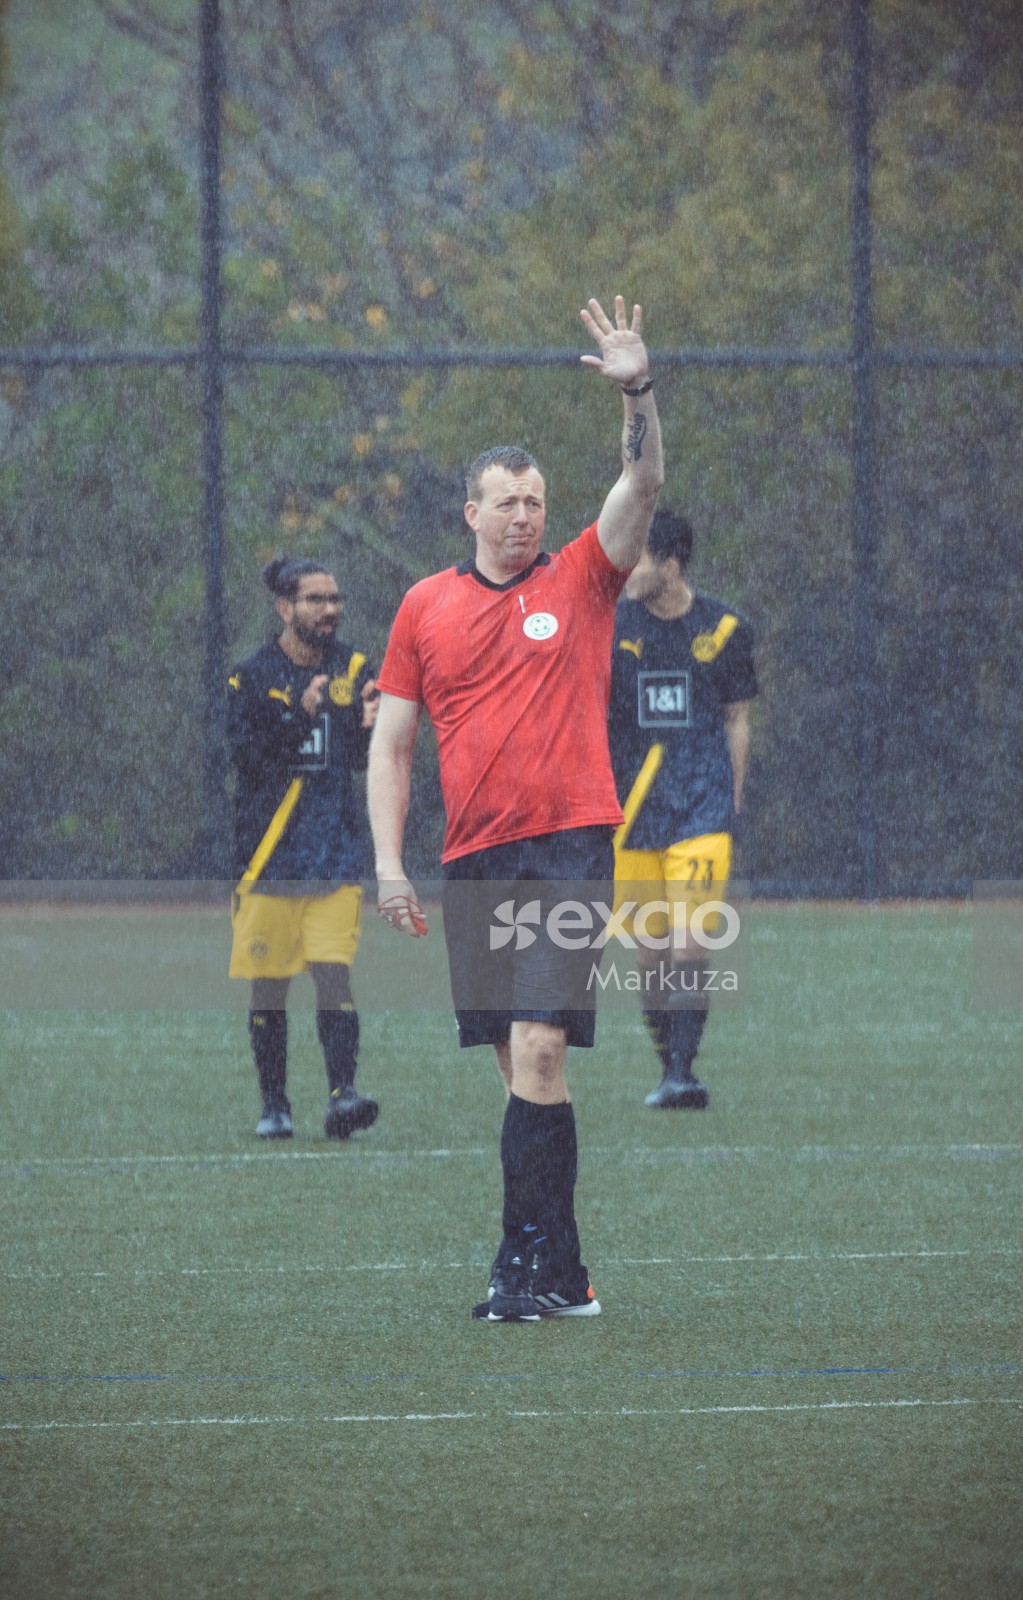 Player in red shirt raising hand in the rain - Sports Zone sunday league